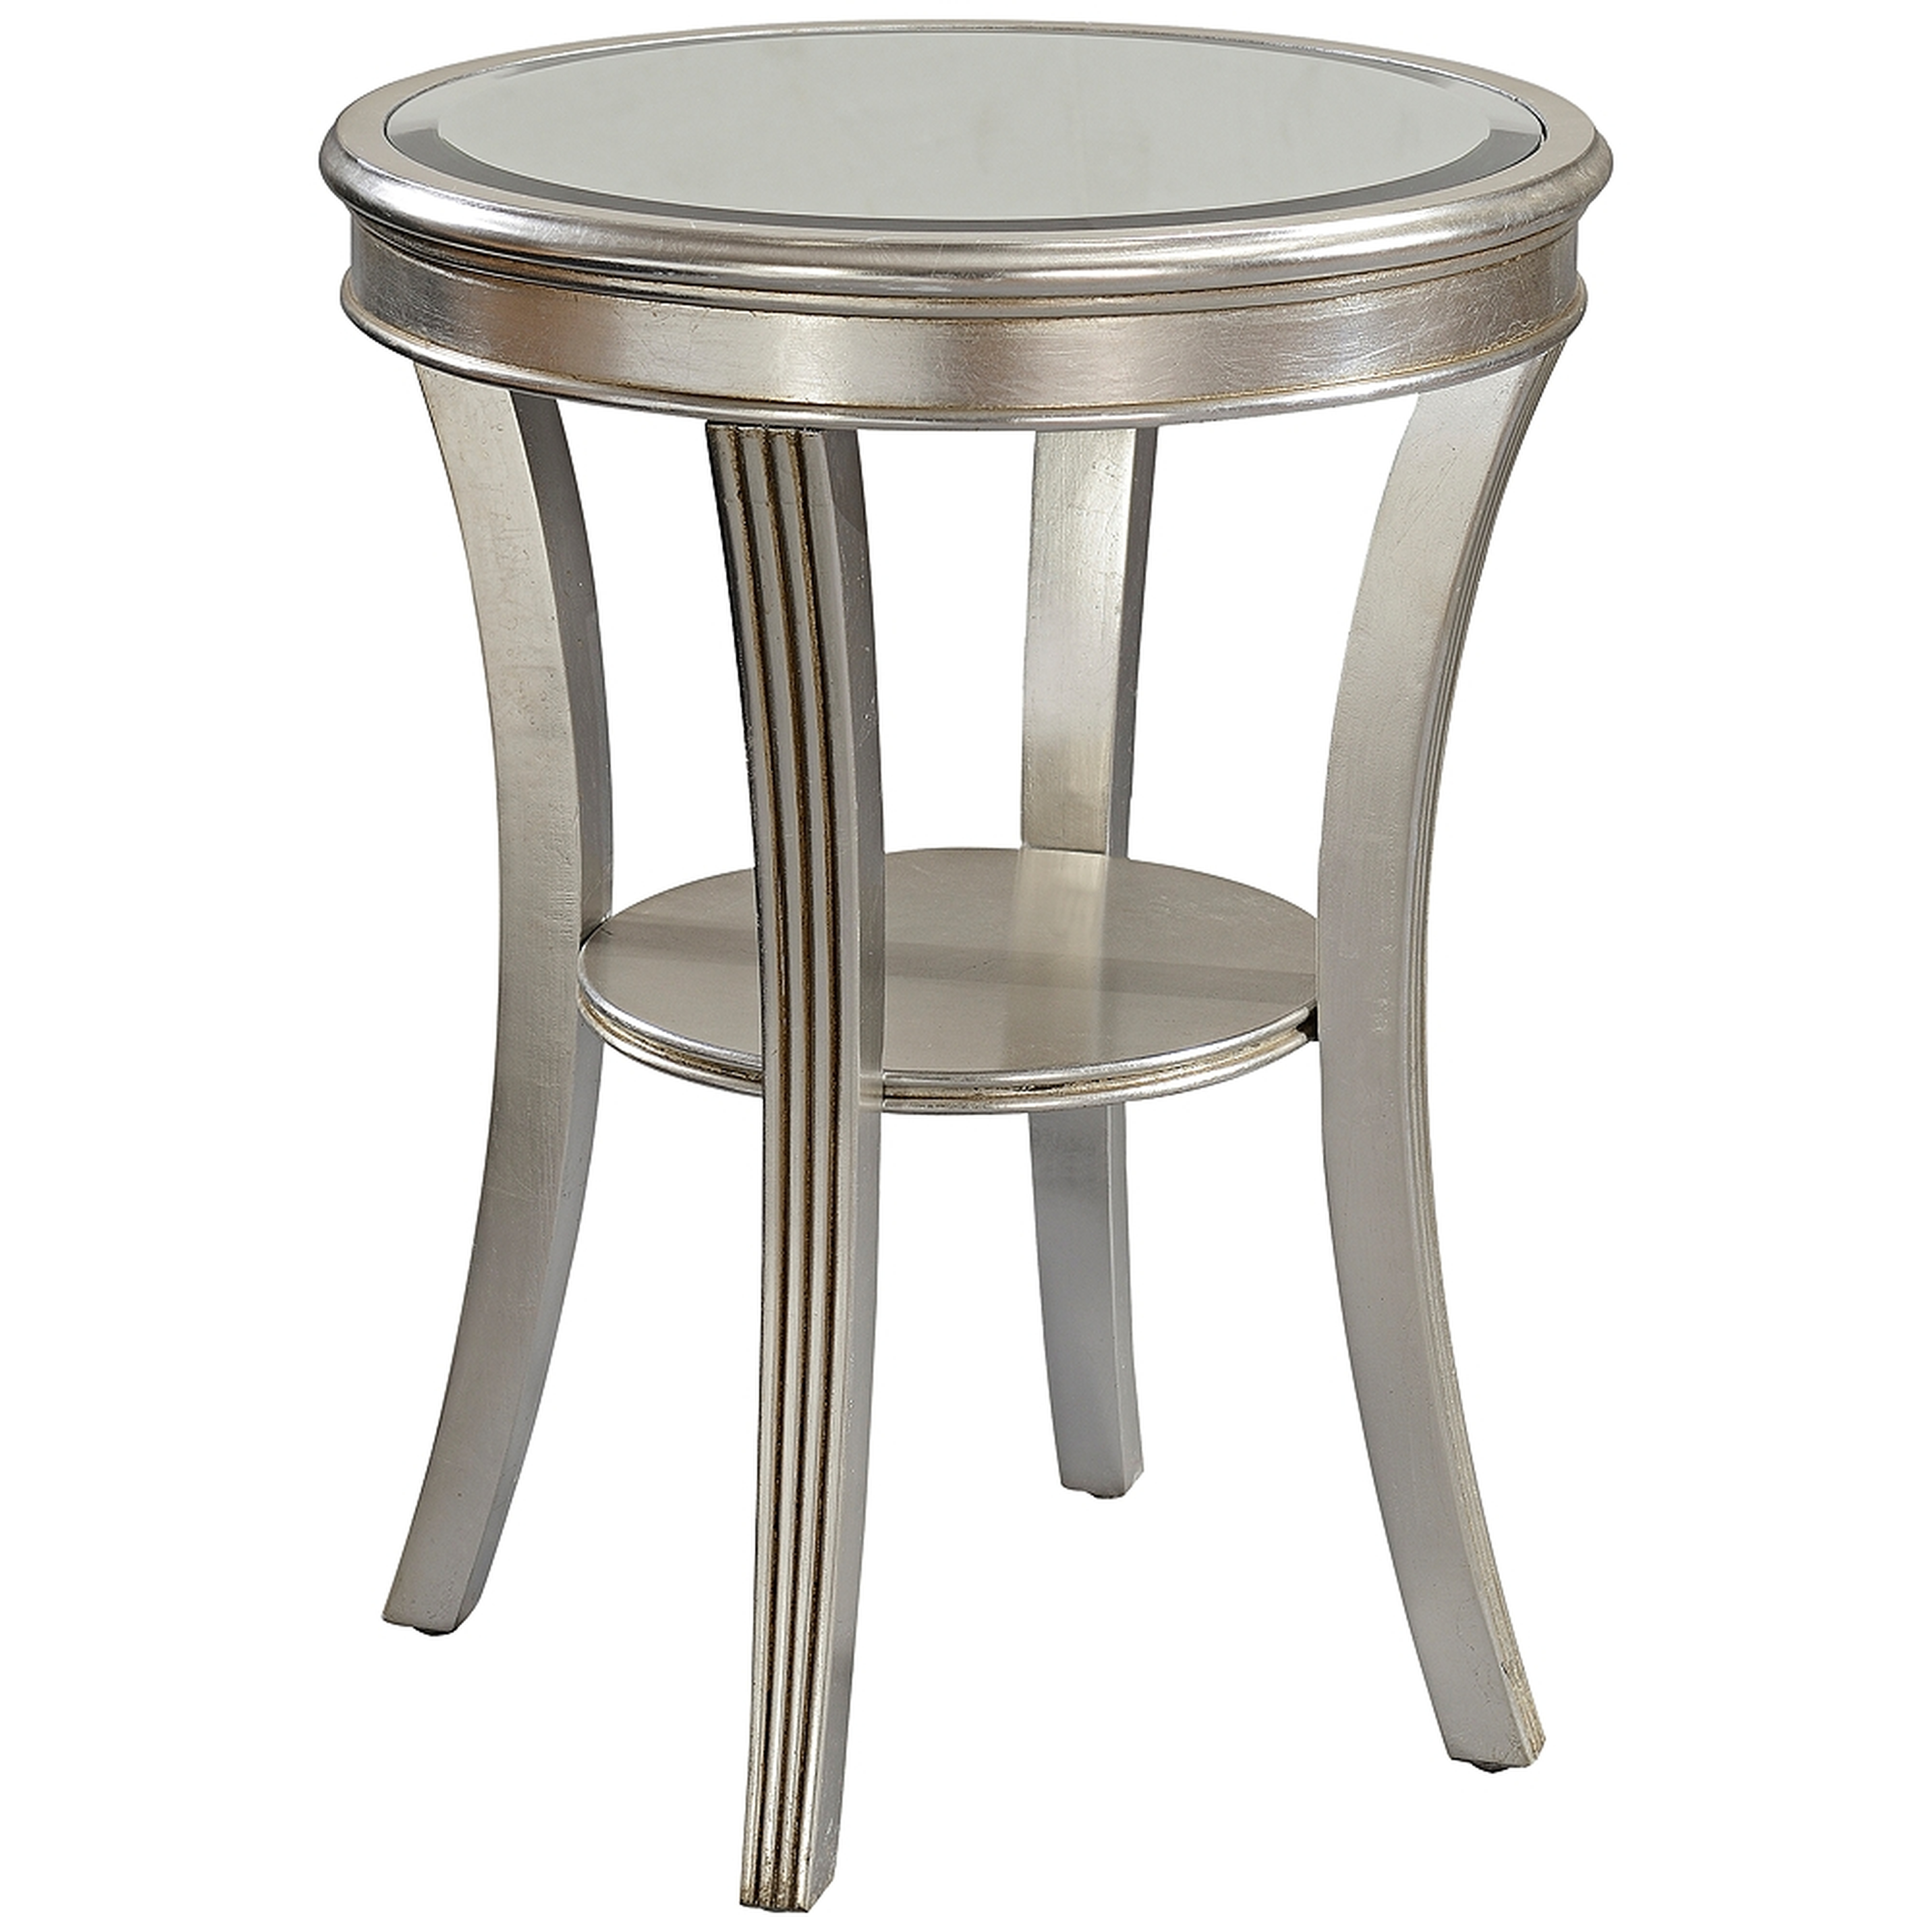 Brookhurst Kenney Silver Leaf Round Accent Table - Style # 1F884 - Lamps Plus